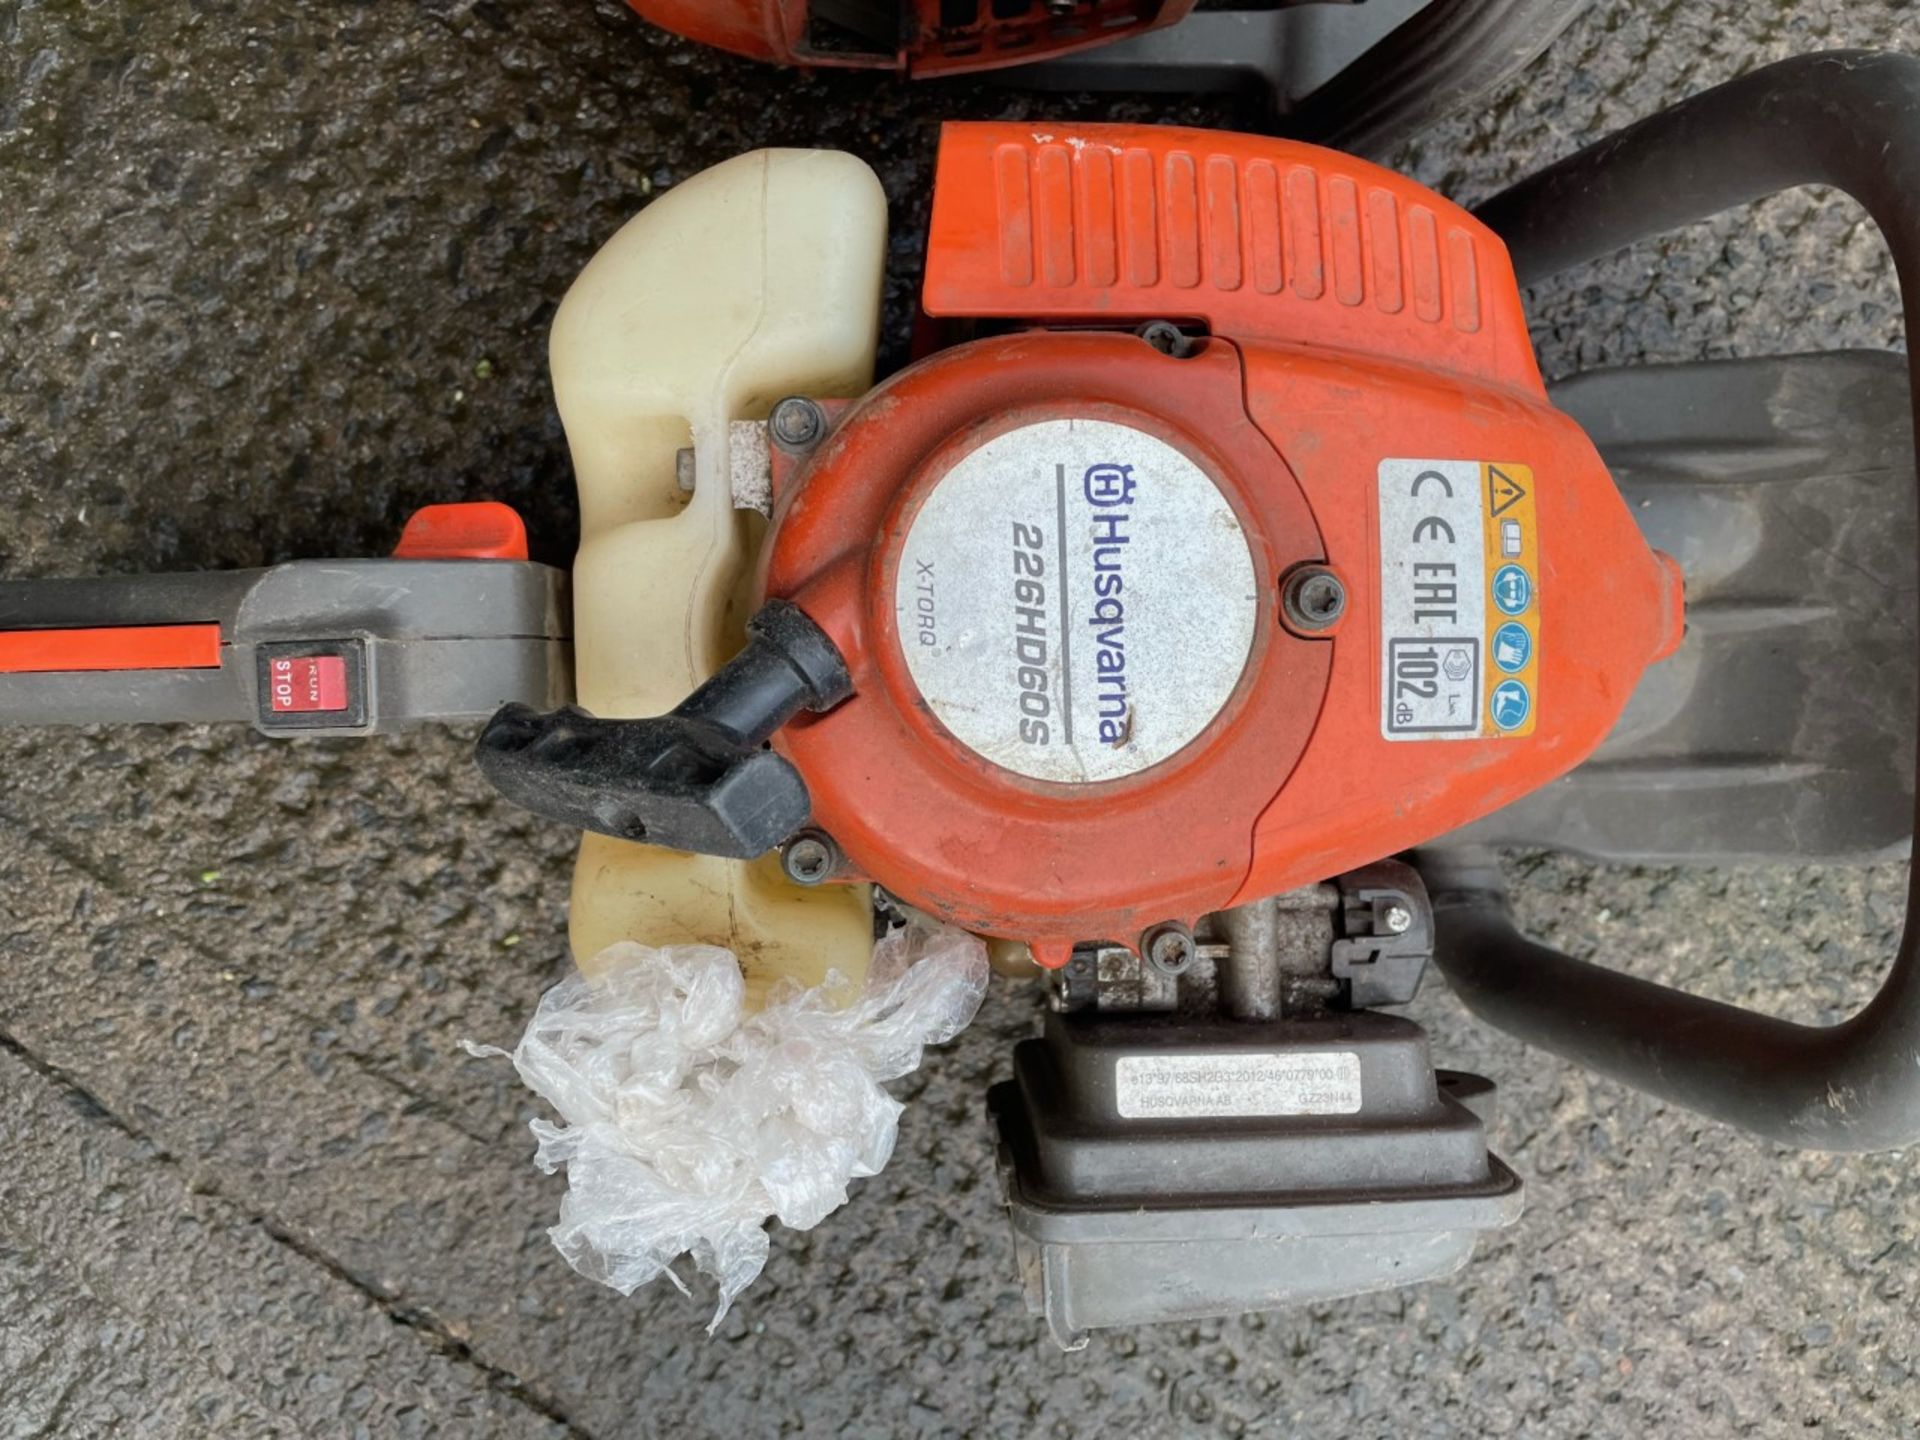 2x Husqvarna hedge cutters both spares or repair - Image 2 of 3